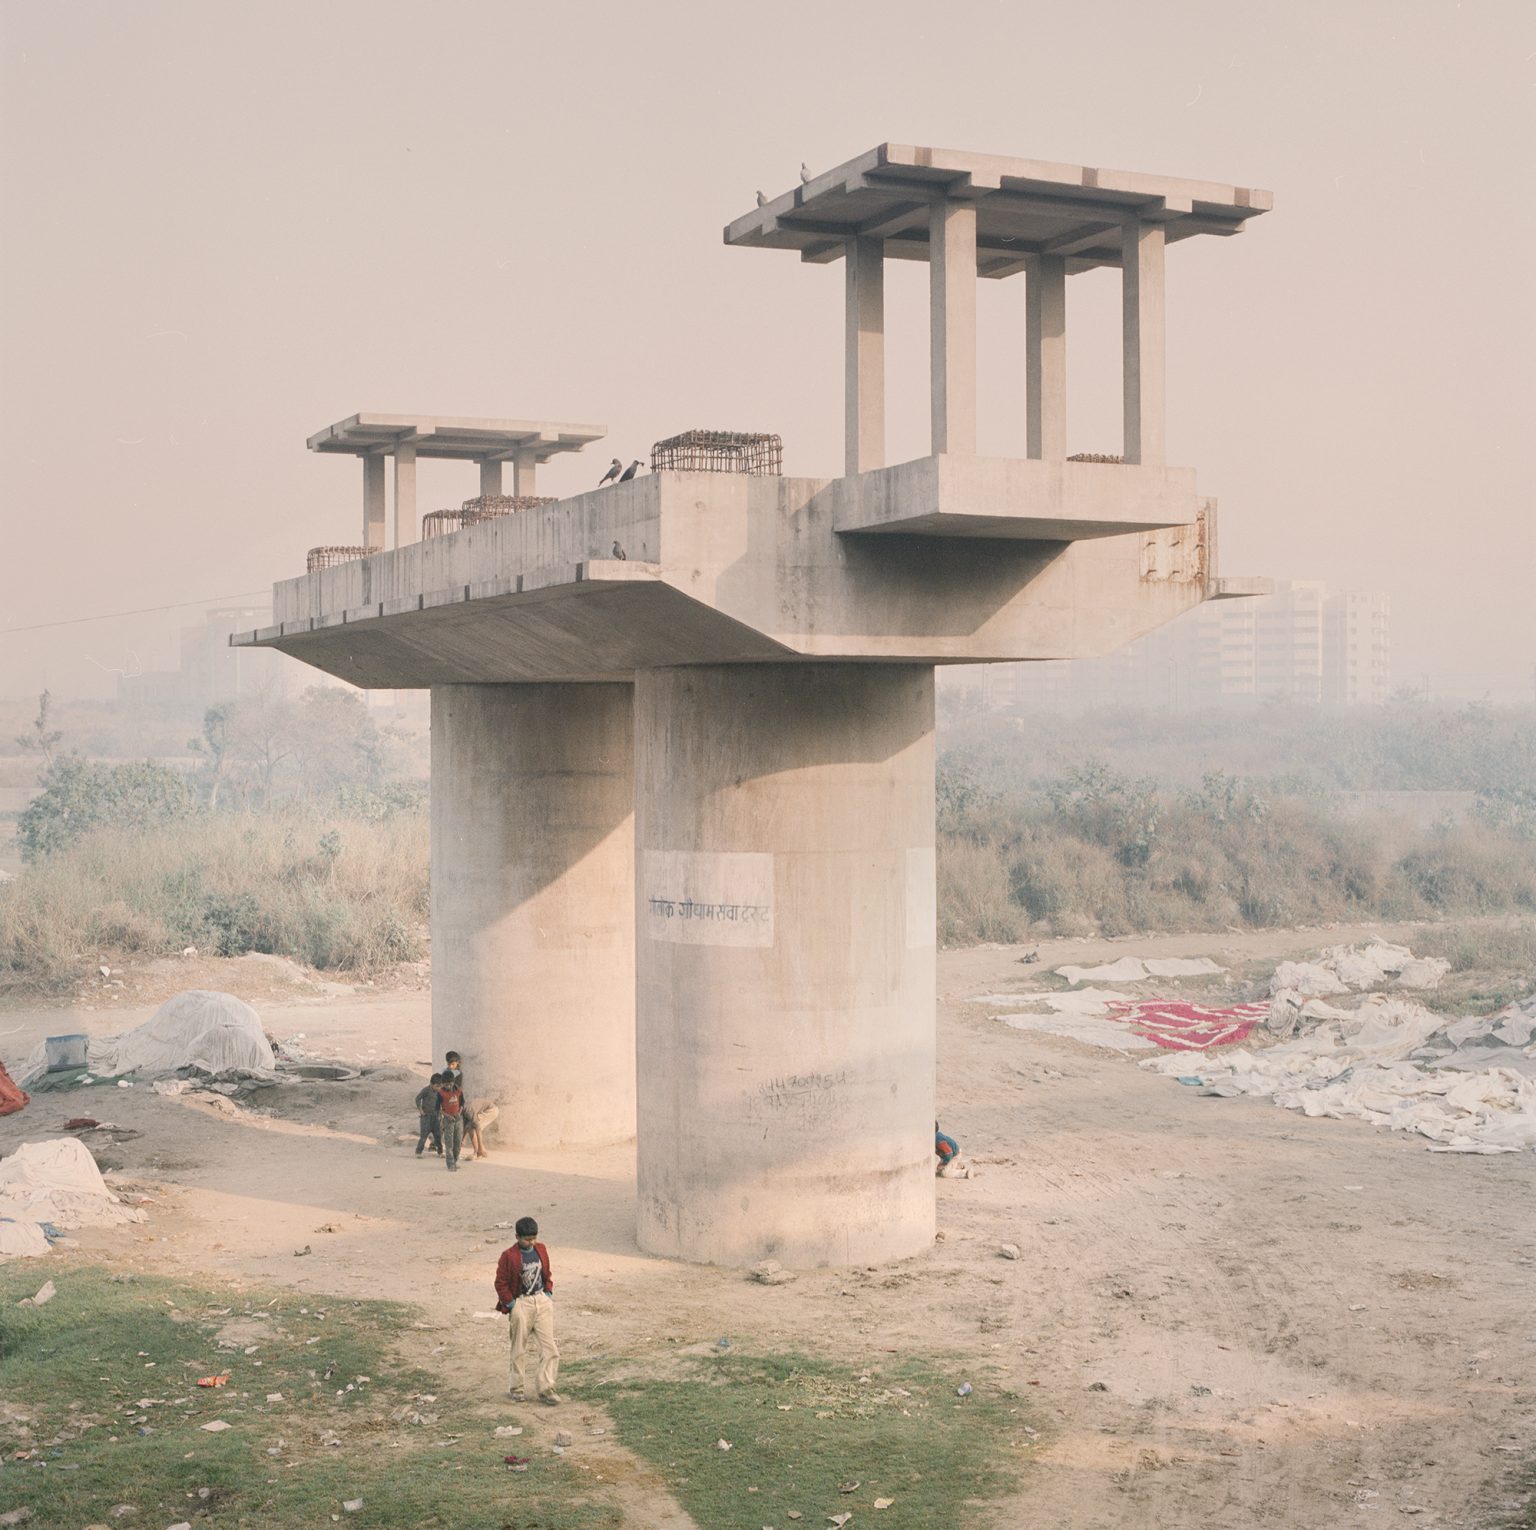 An outdoor makshift laundry for hotels along the Yamuna river in Delhi, near a pillar for the constuction of a new bridge.